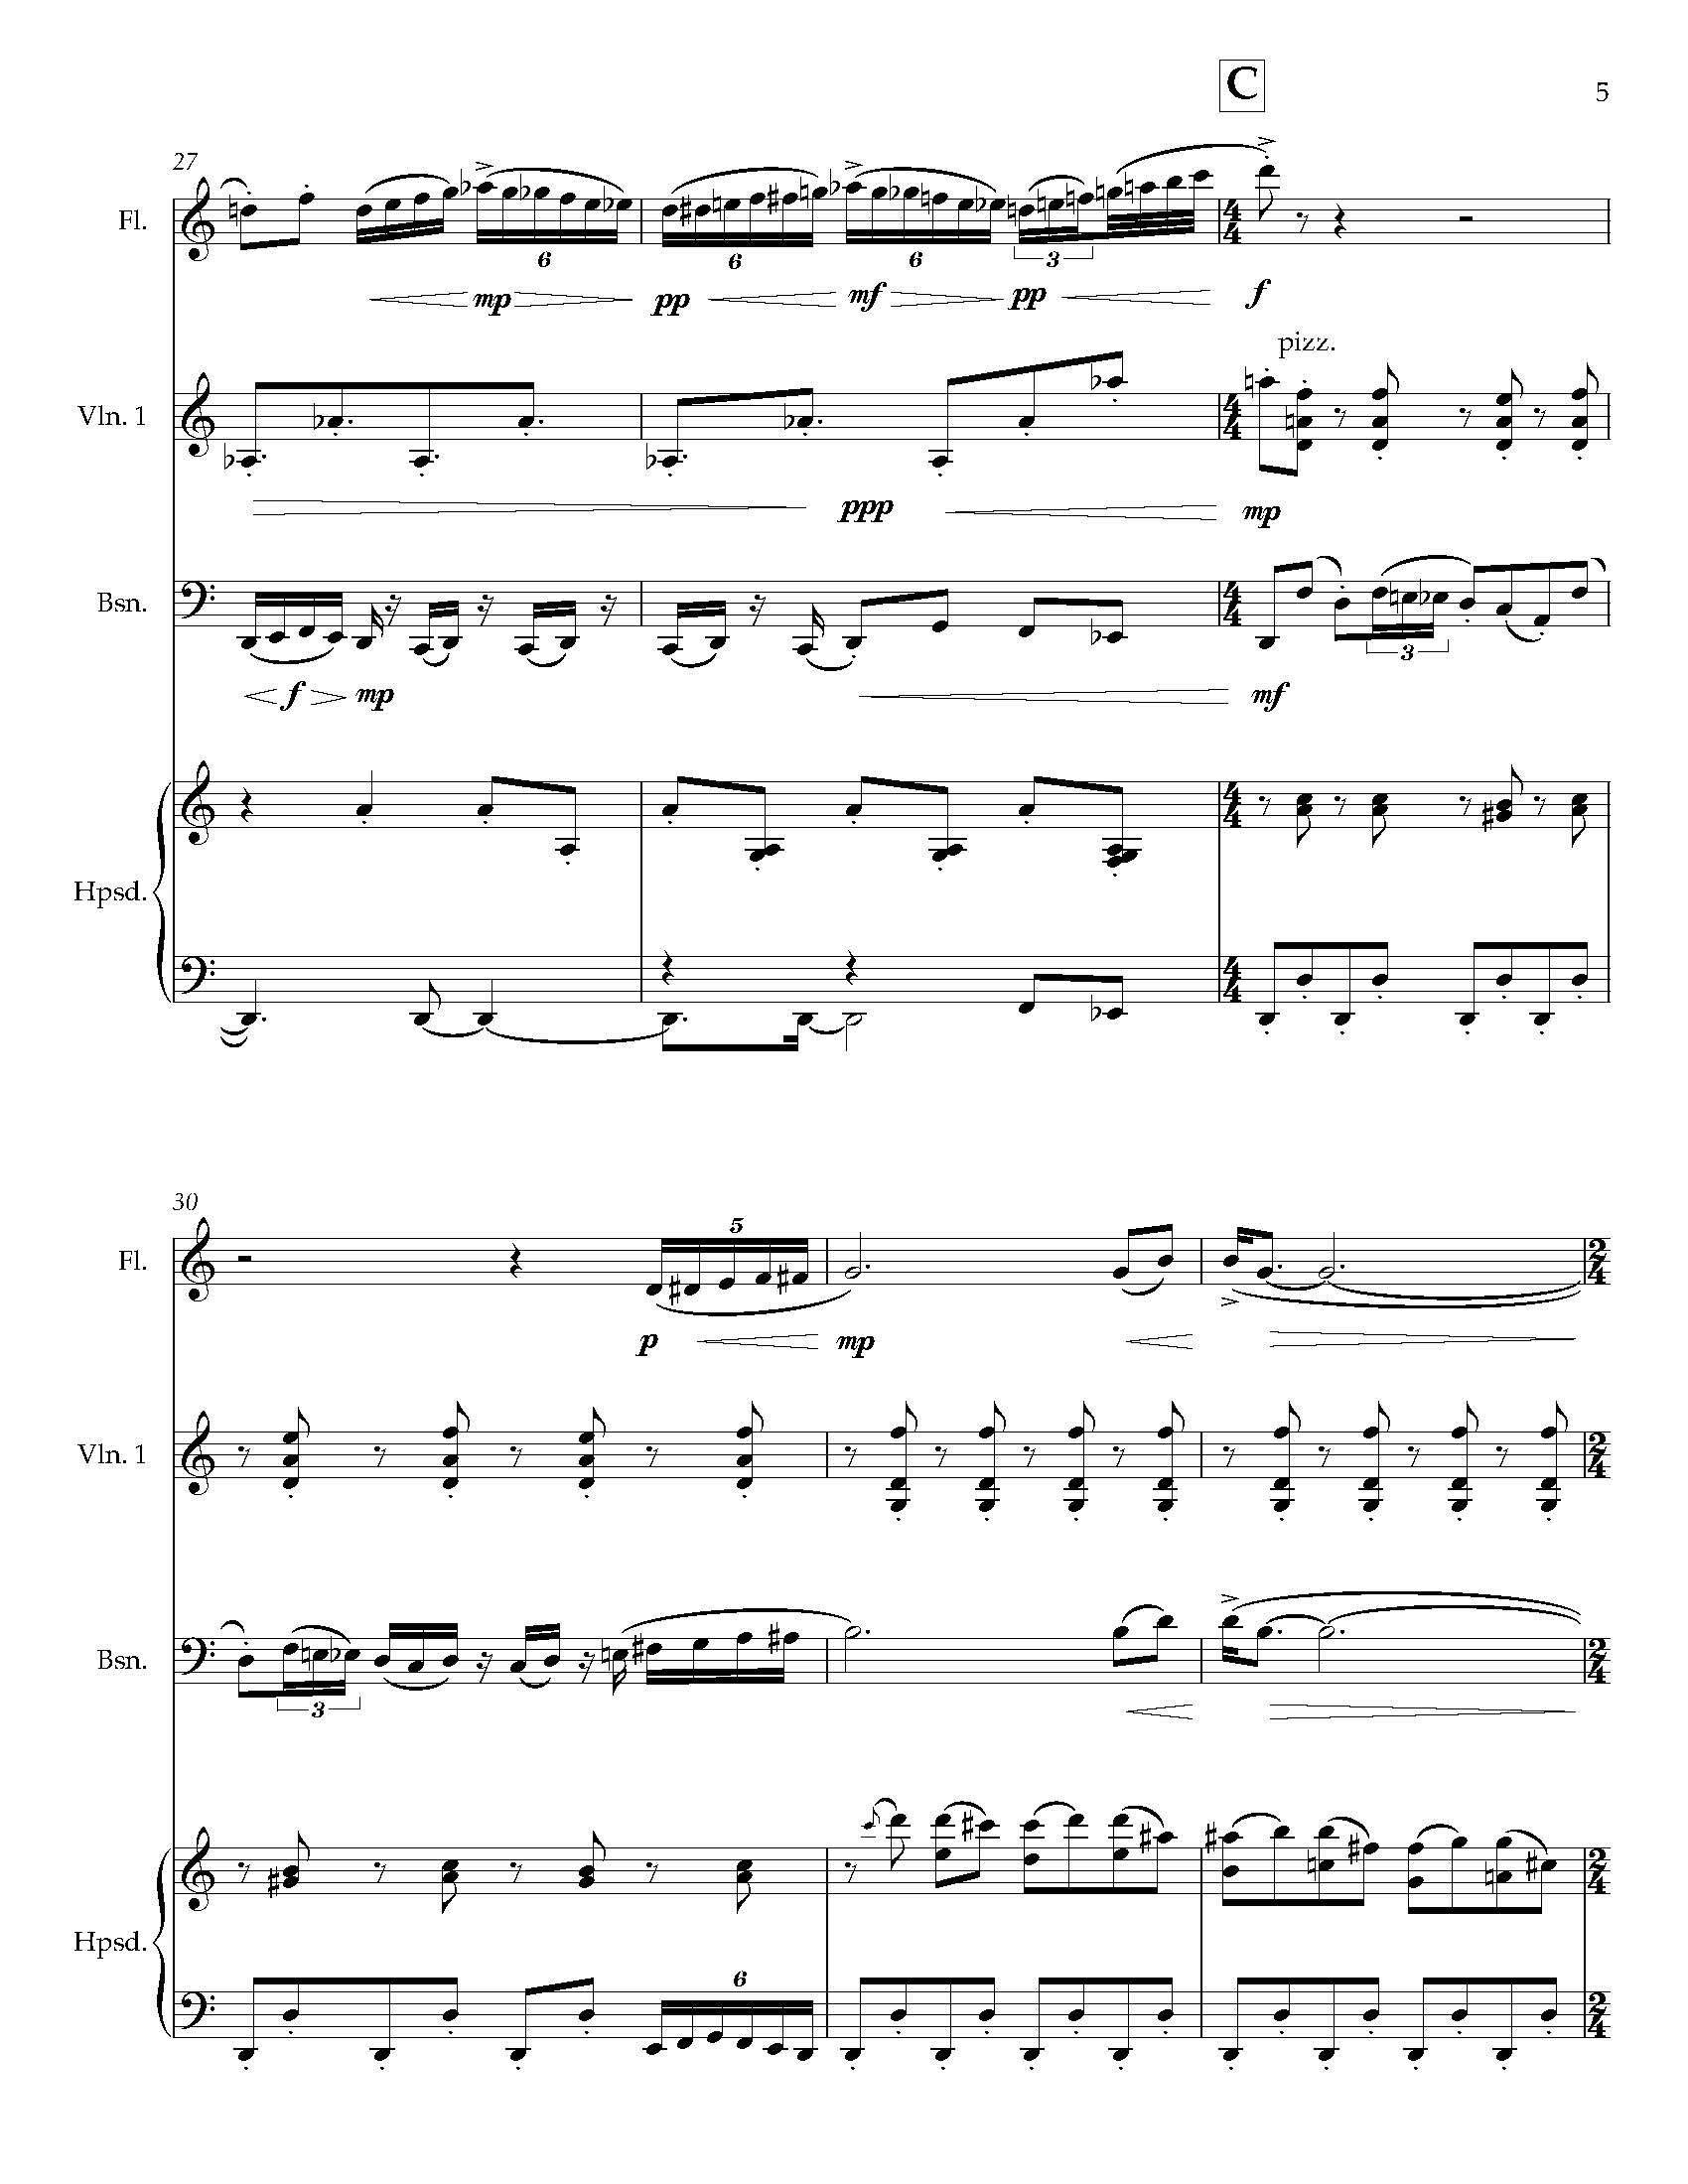 The Hourglass Equation - Complete Score_Page_11.jpg